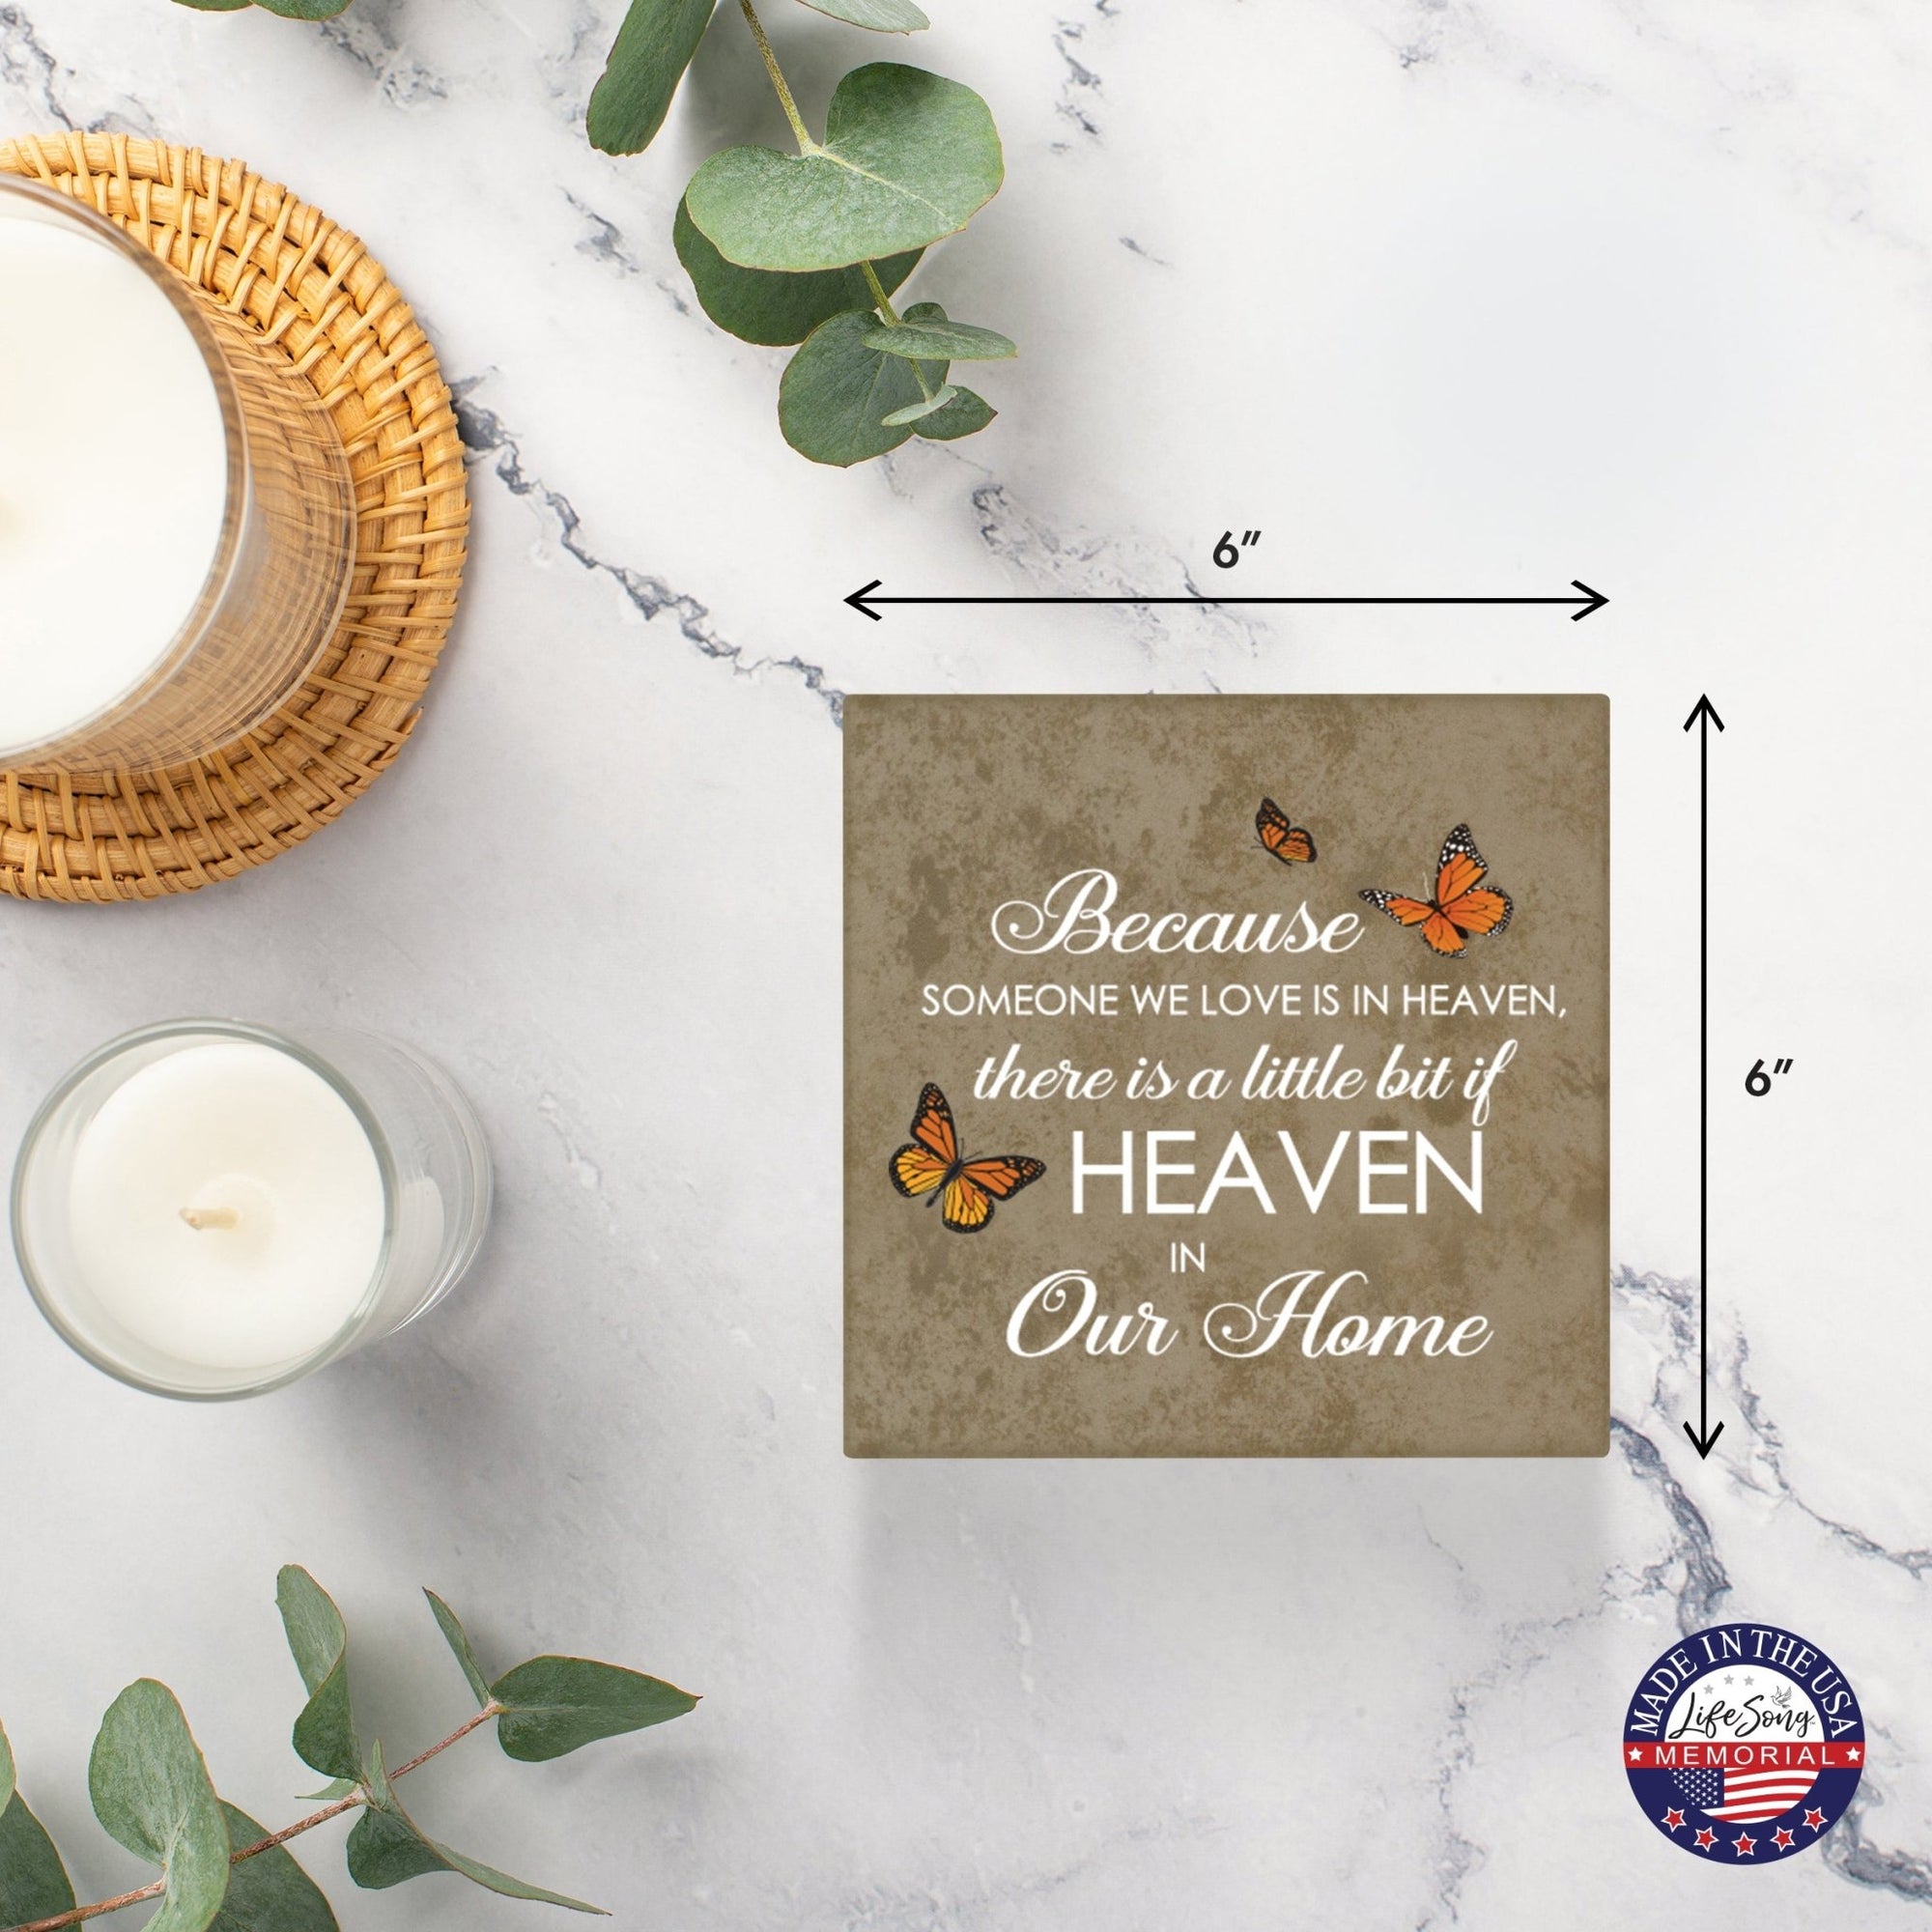 Memorial Ceramic Trivet with Stand for Home Decor - Because Someone We Love - LifeSong Milestones